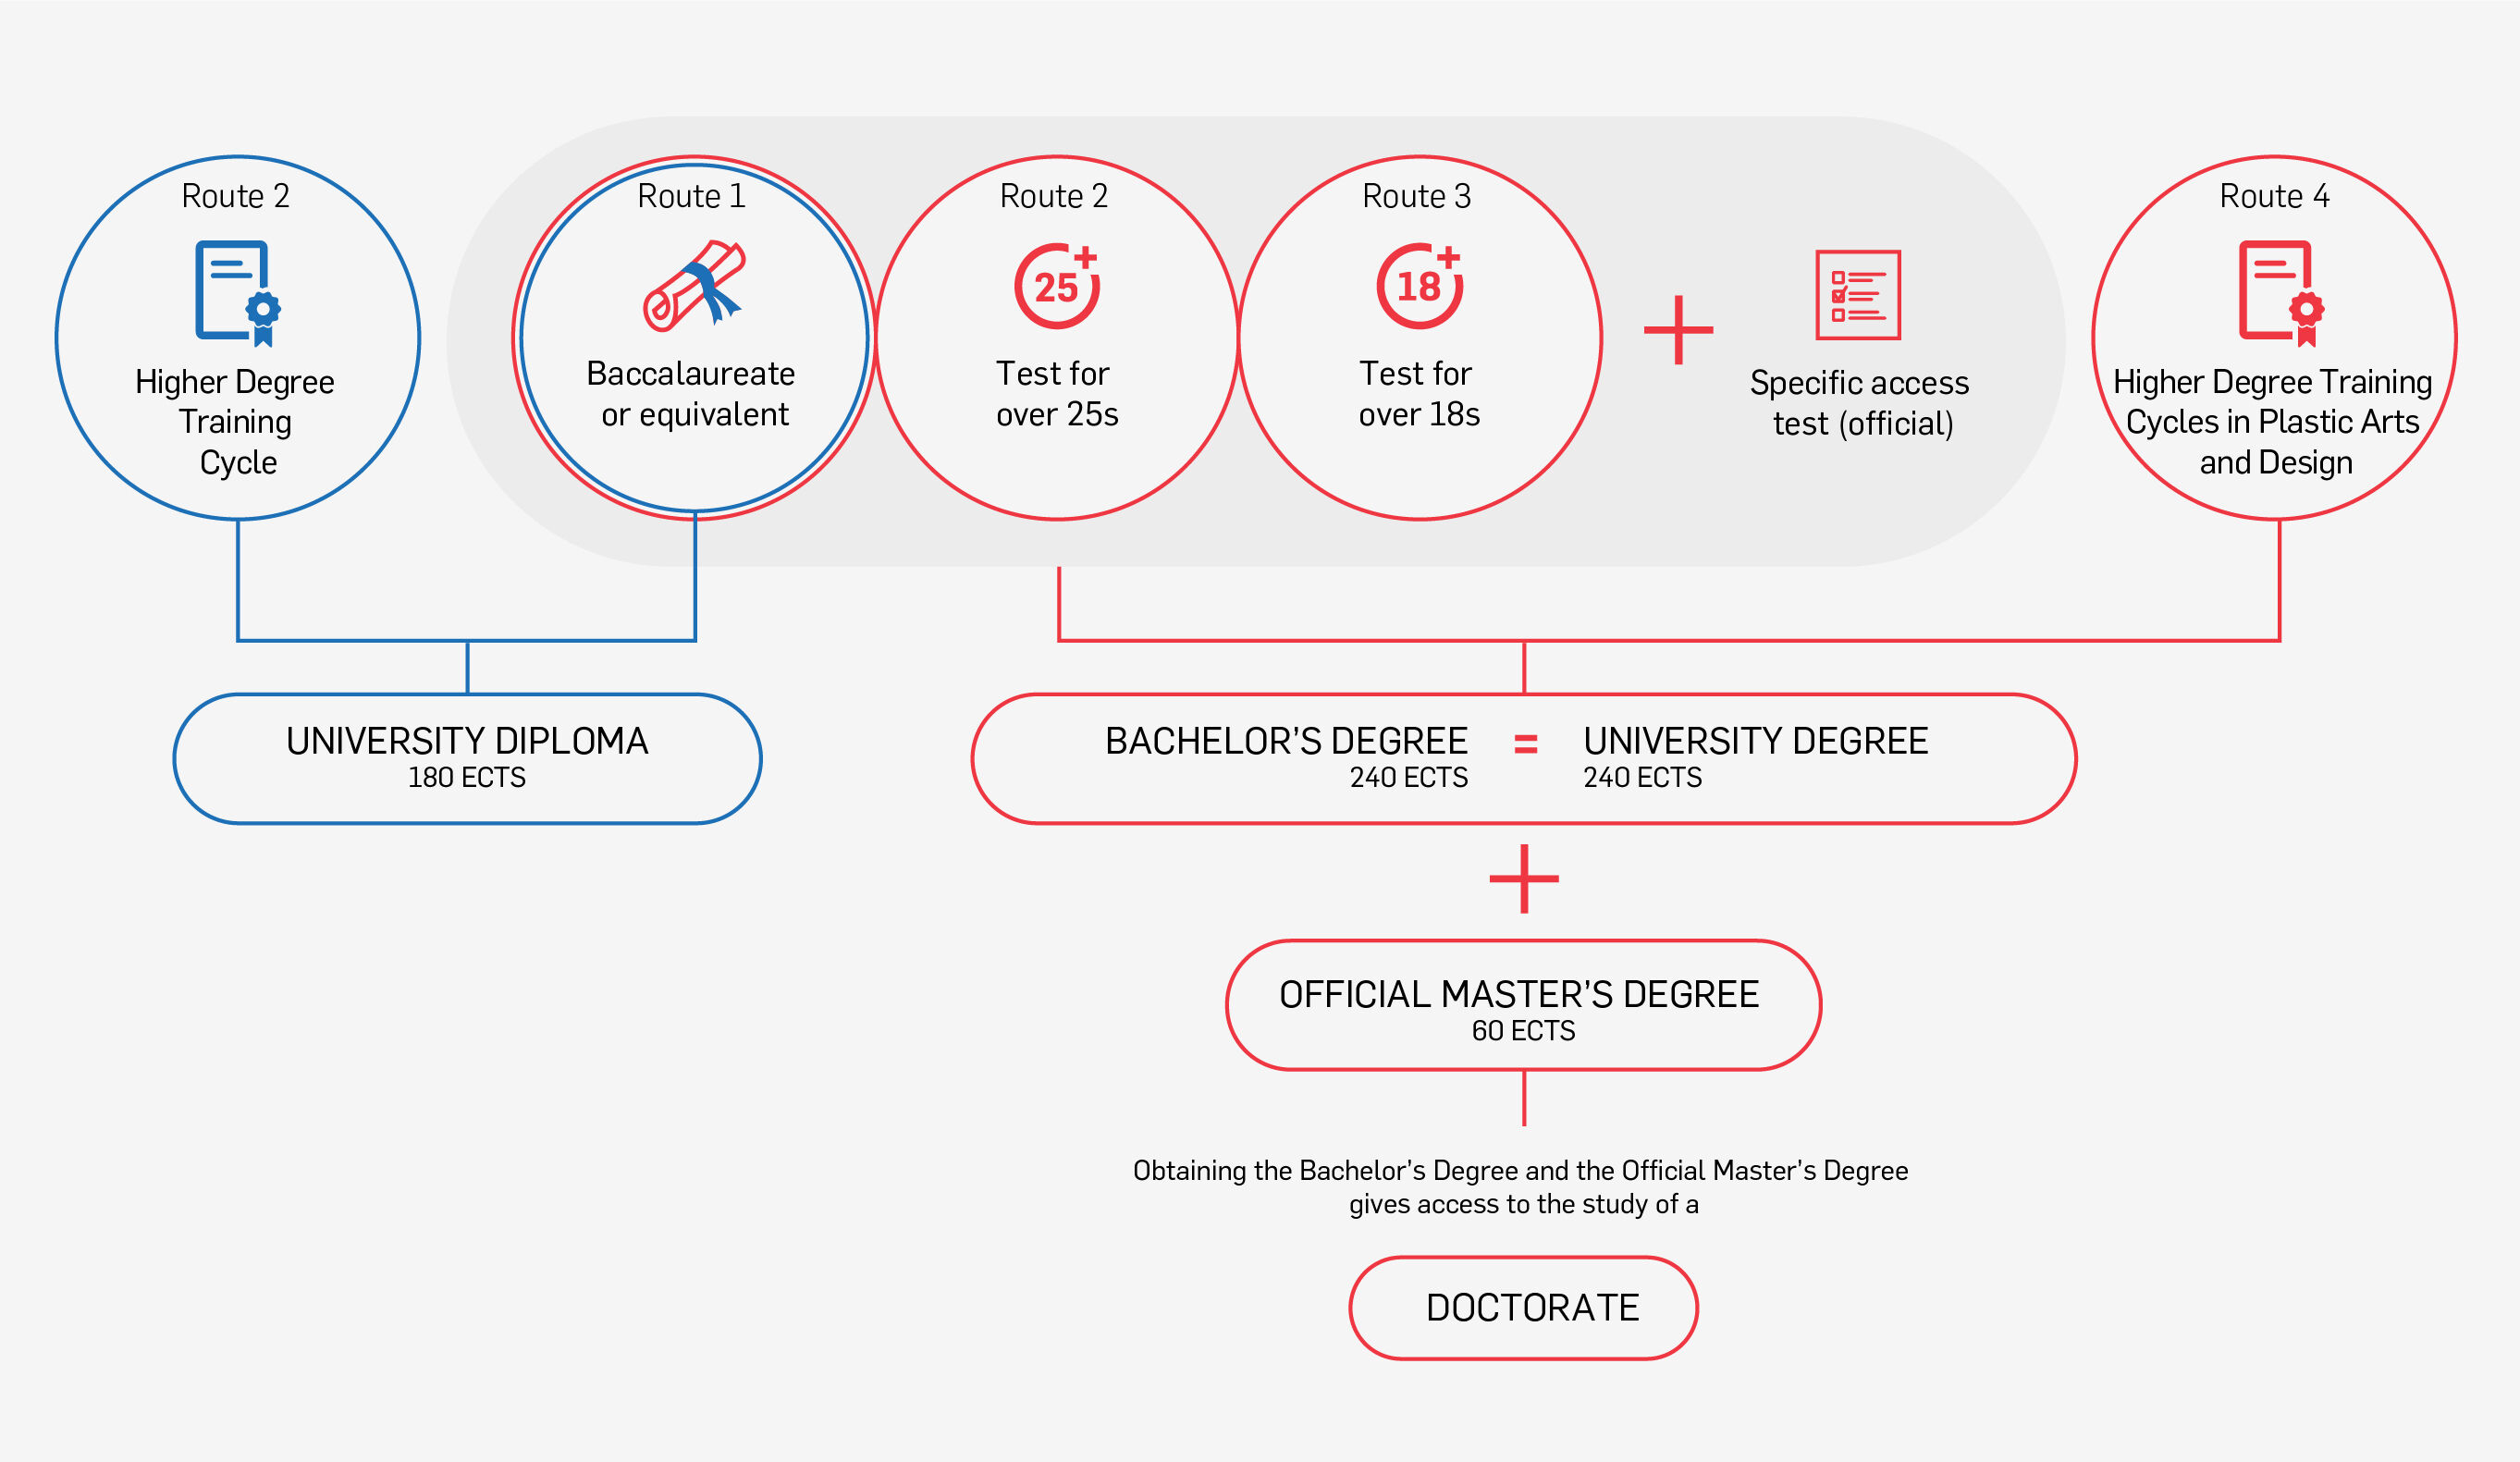 A visual guide to academic progression, depicting four routes to a university diploma (180 ECTS), bachelor's degree (240 ECTS), master's degree (60 ECTS), and doctorate. Highlights alternative paths for adult learners and qualifications in plastic arts and design.